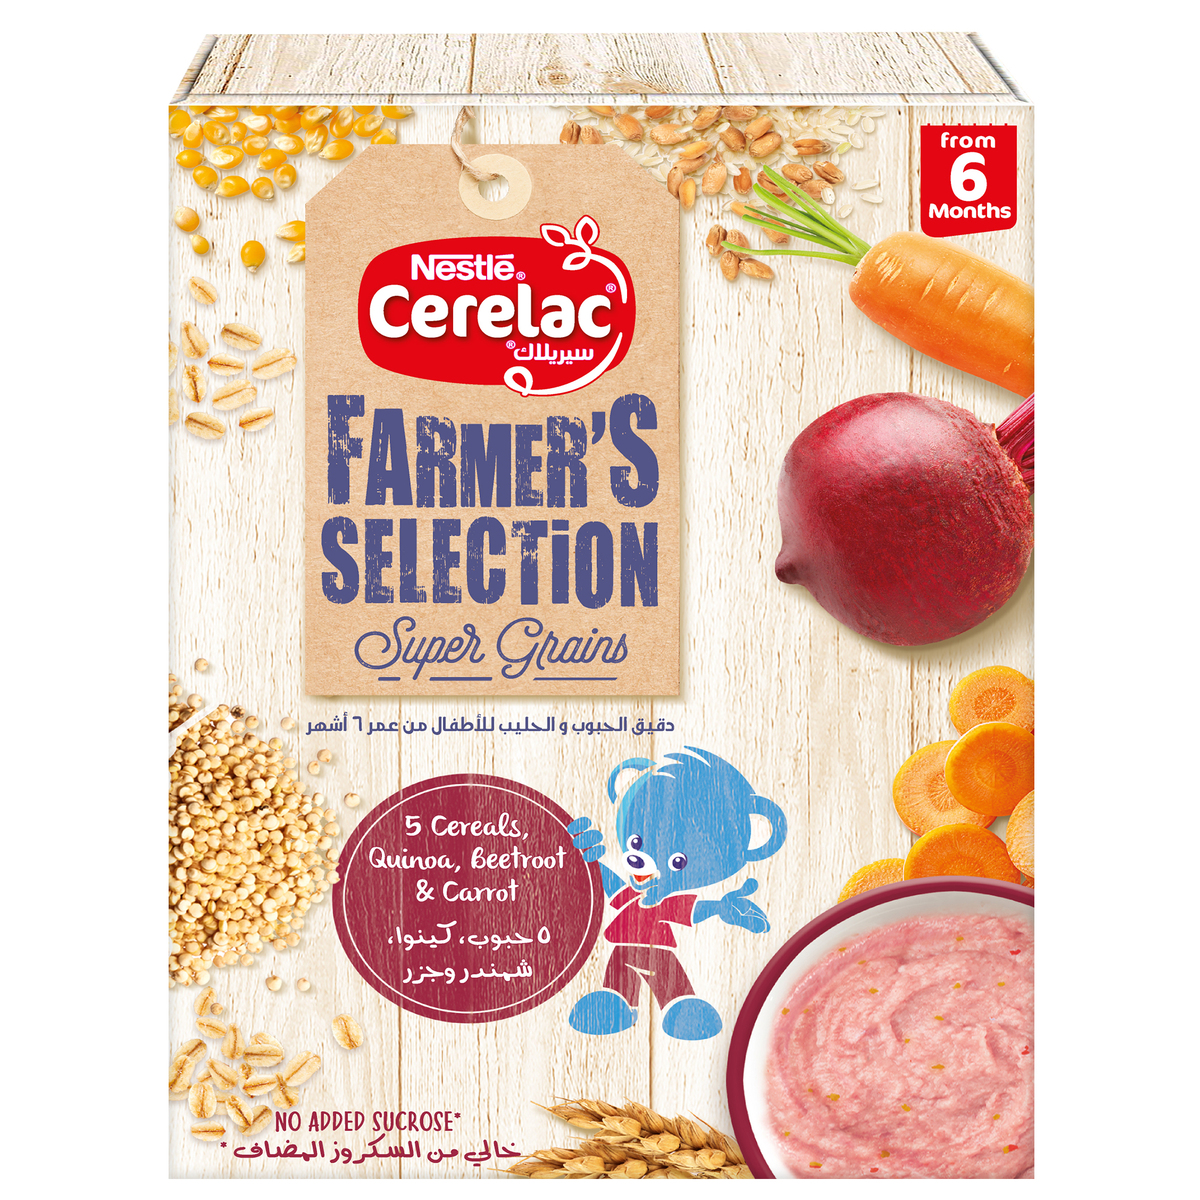 Nestle Cerelac Farmer's Selection Bib 5 Cereals Quinoa Beetroot & Carrot From 6 Months 250g